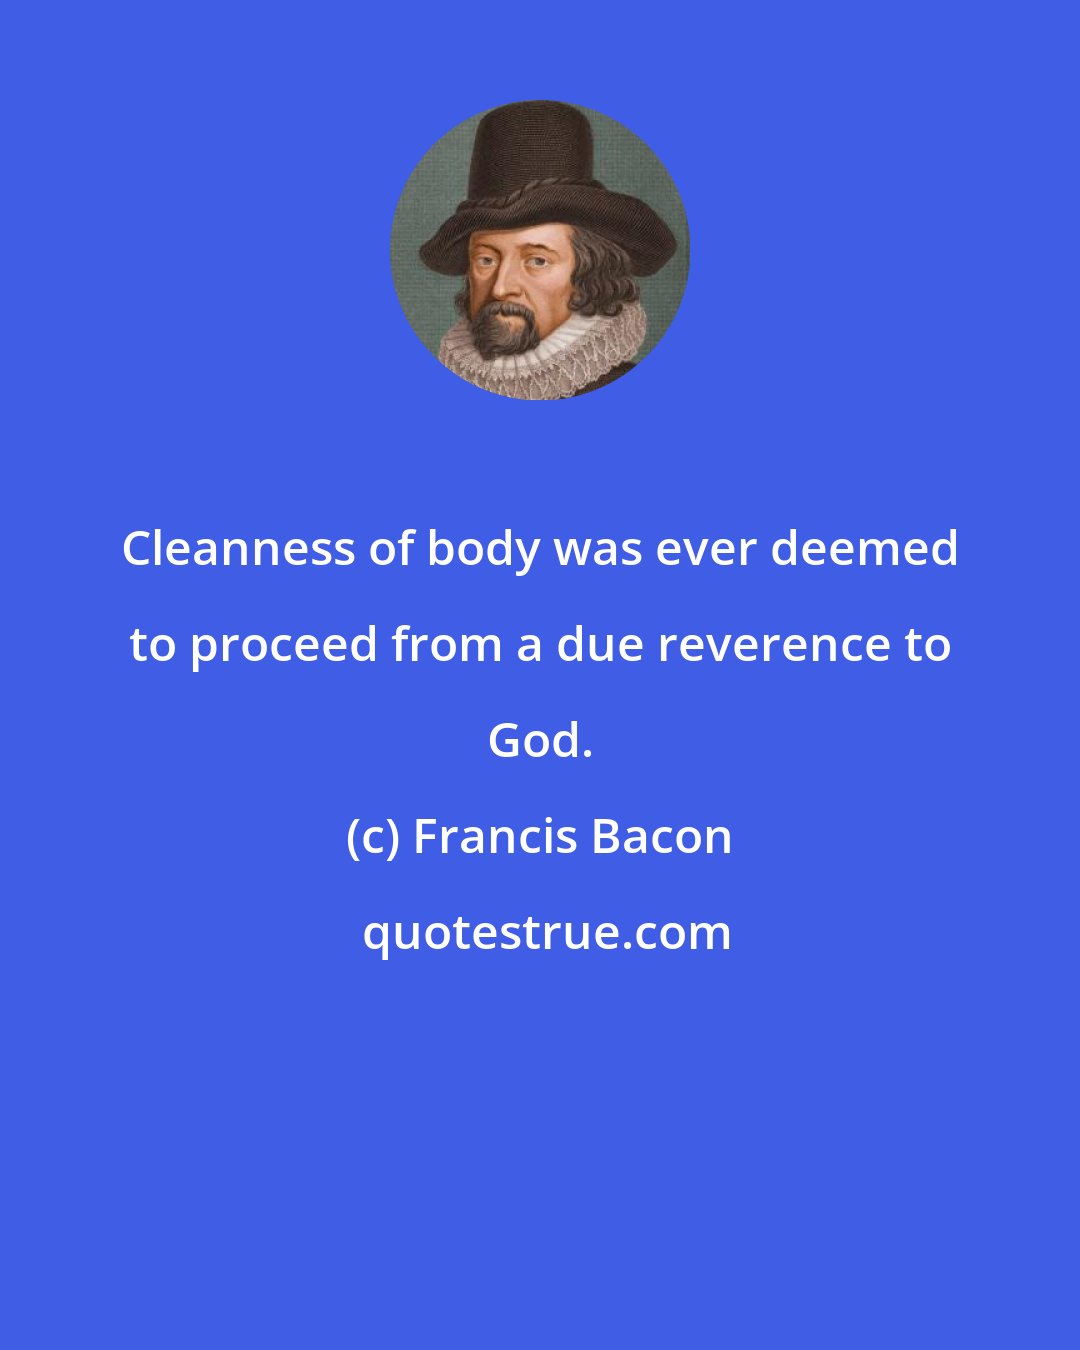 Francis Bacon: Cleanness of body was ever deemed to proceed from a due reverence to God.